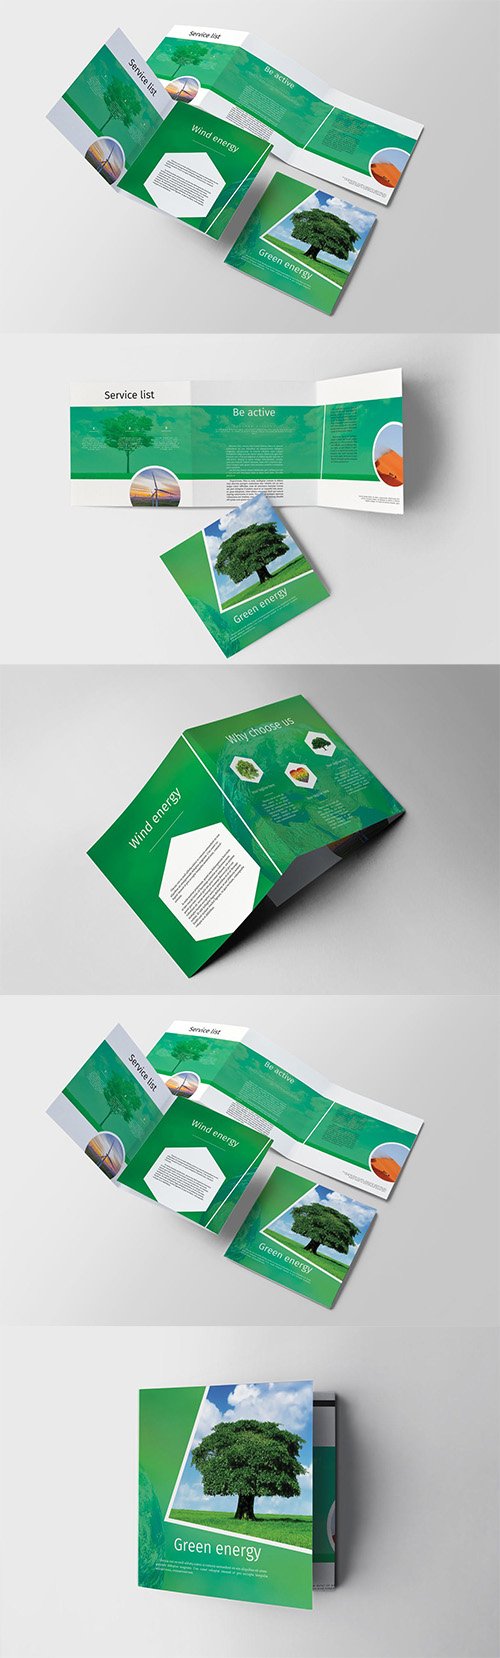 Green Energy Trifold Brochure Indesign